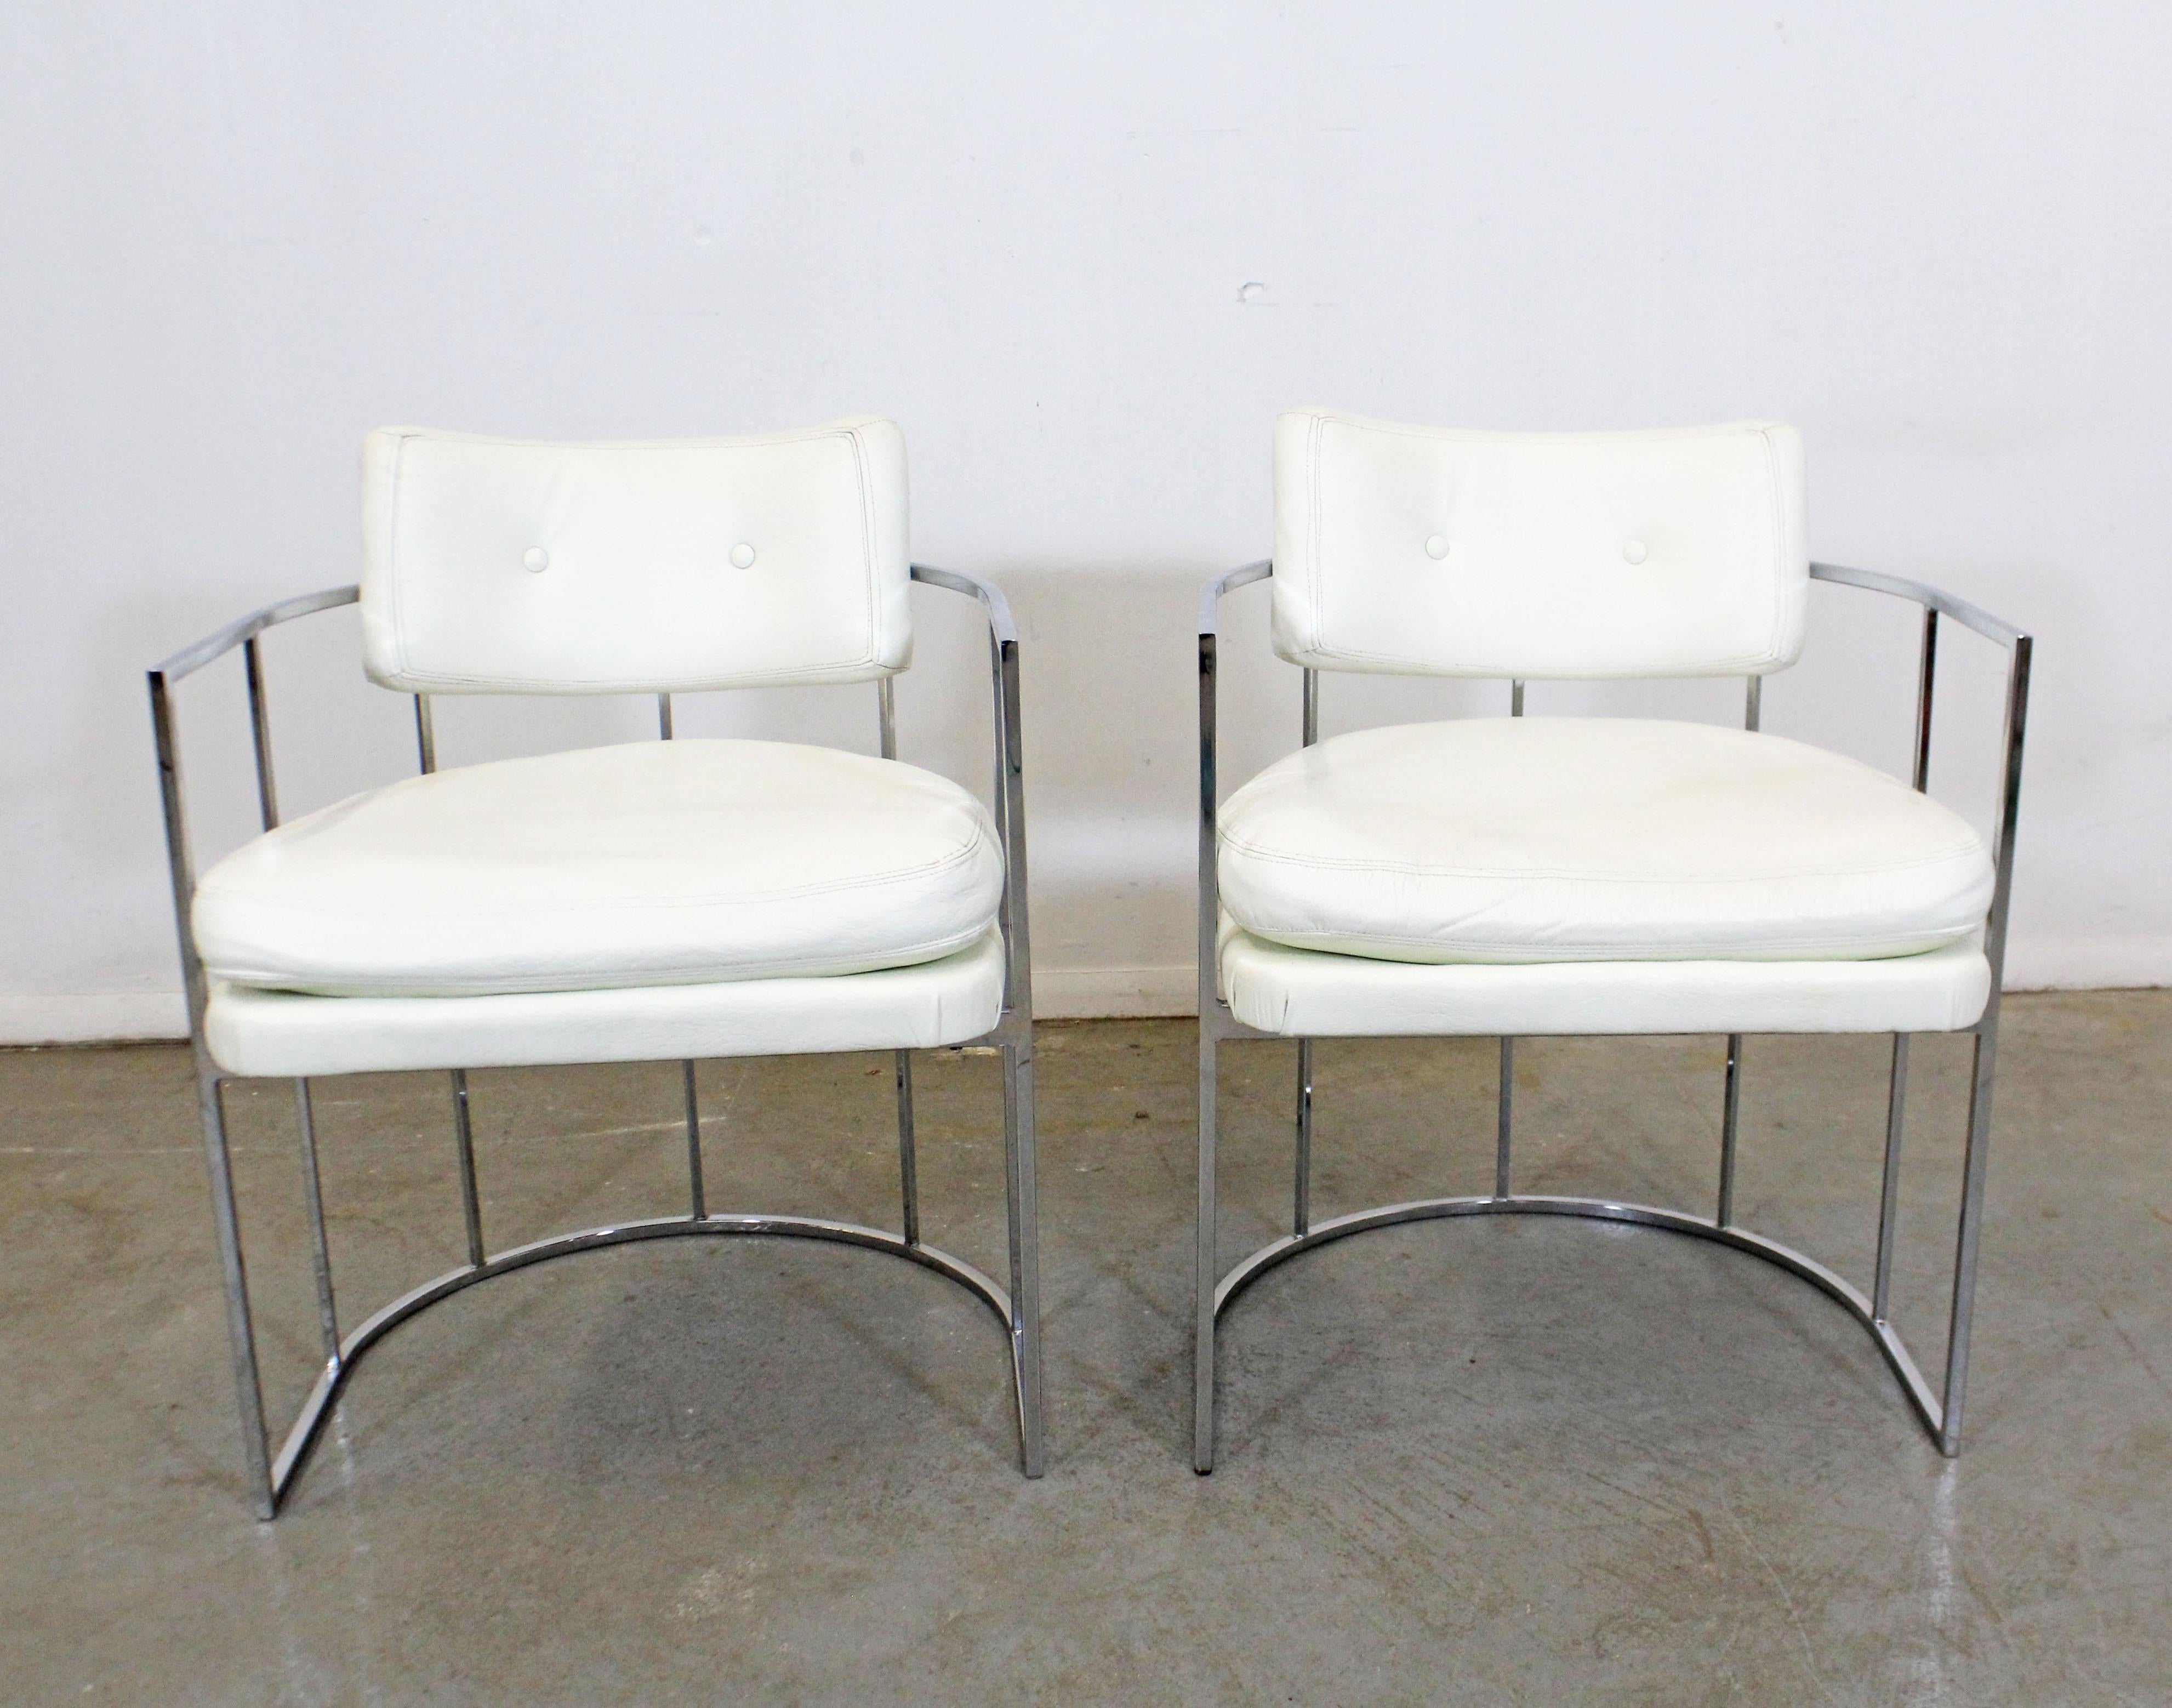 What a find. Offered is a pair of sleek and elegant vintage Mid-Century Modern chrome arm chairs. They were designed by Milo Baughman for Thayer Coggin. These chairs are having chrome bases with rounded backs and white vinyl upholstery. They're in